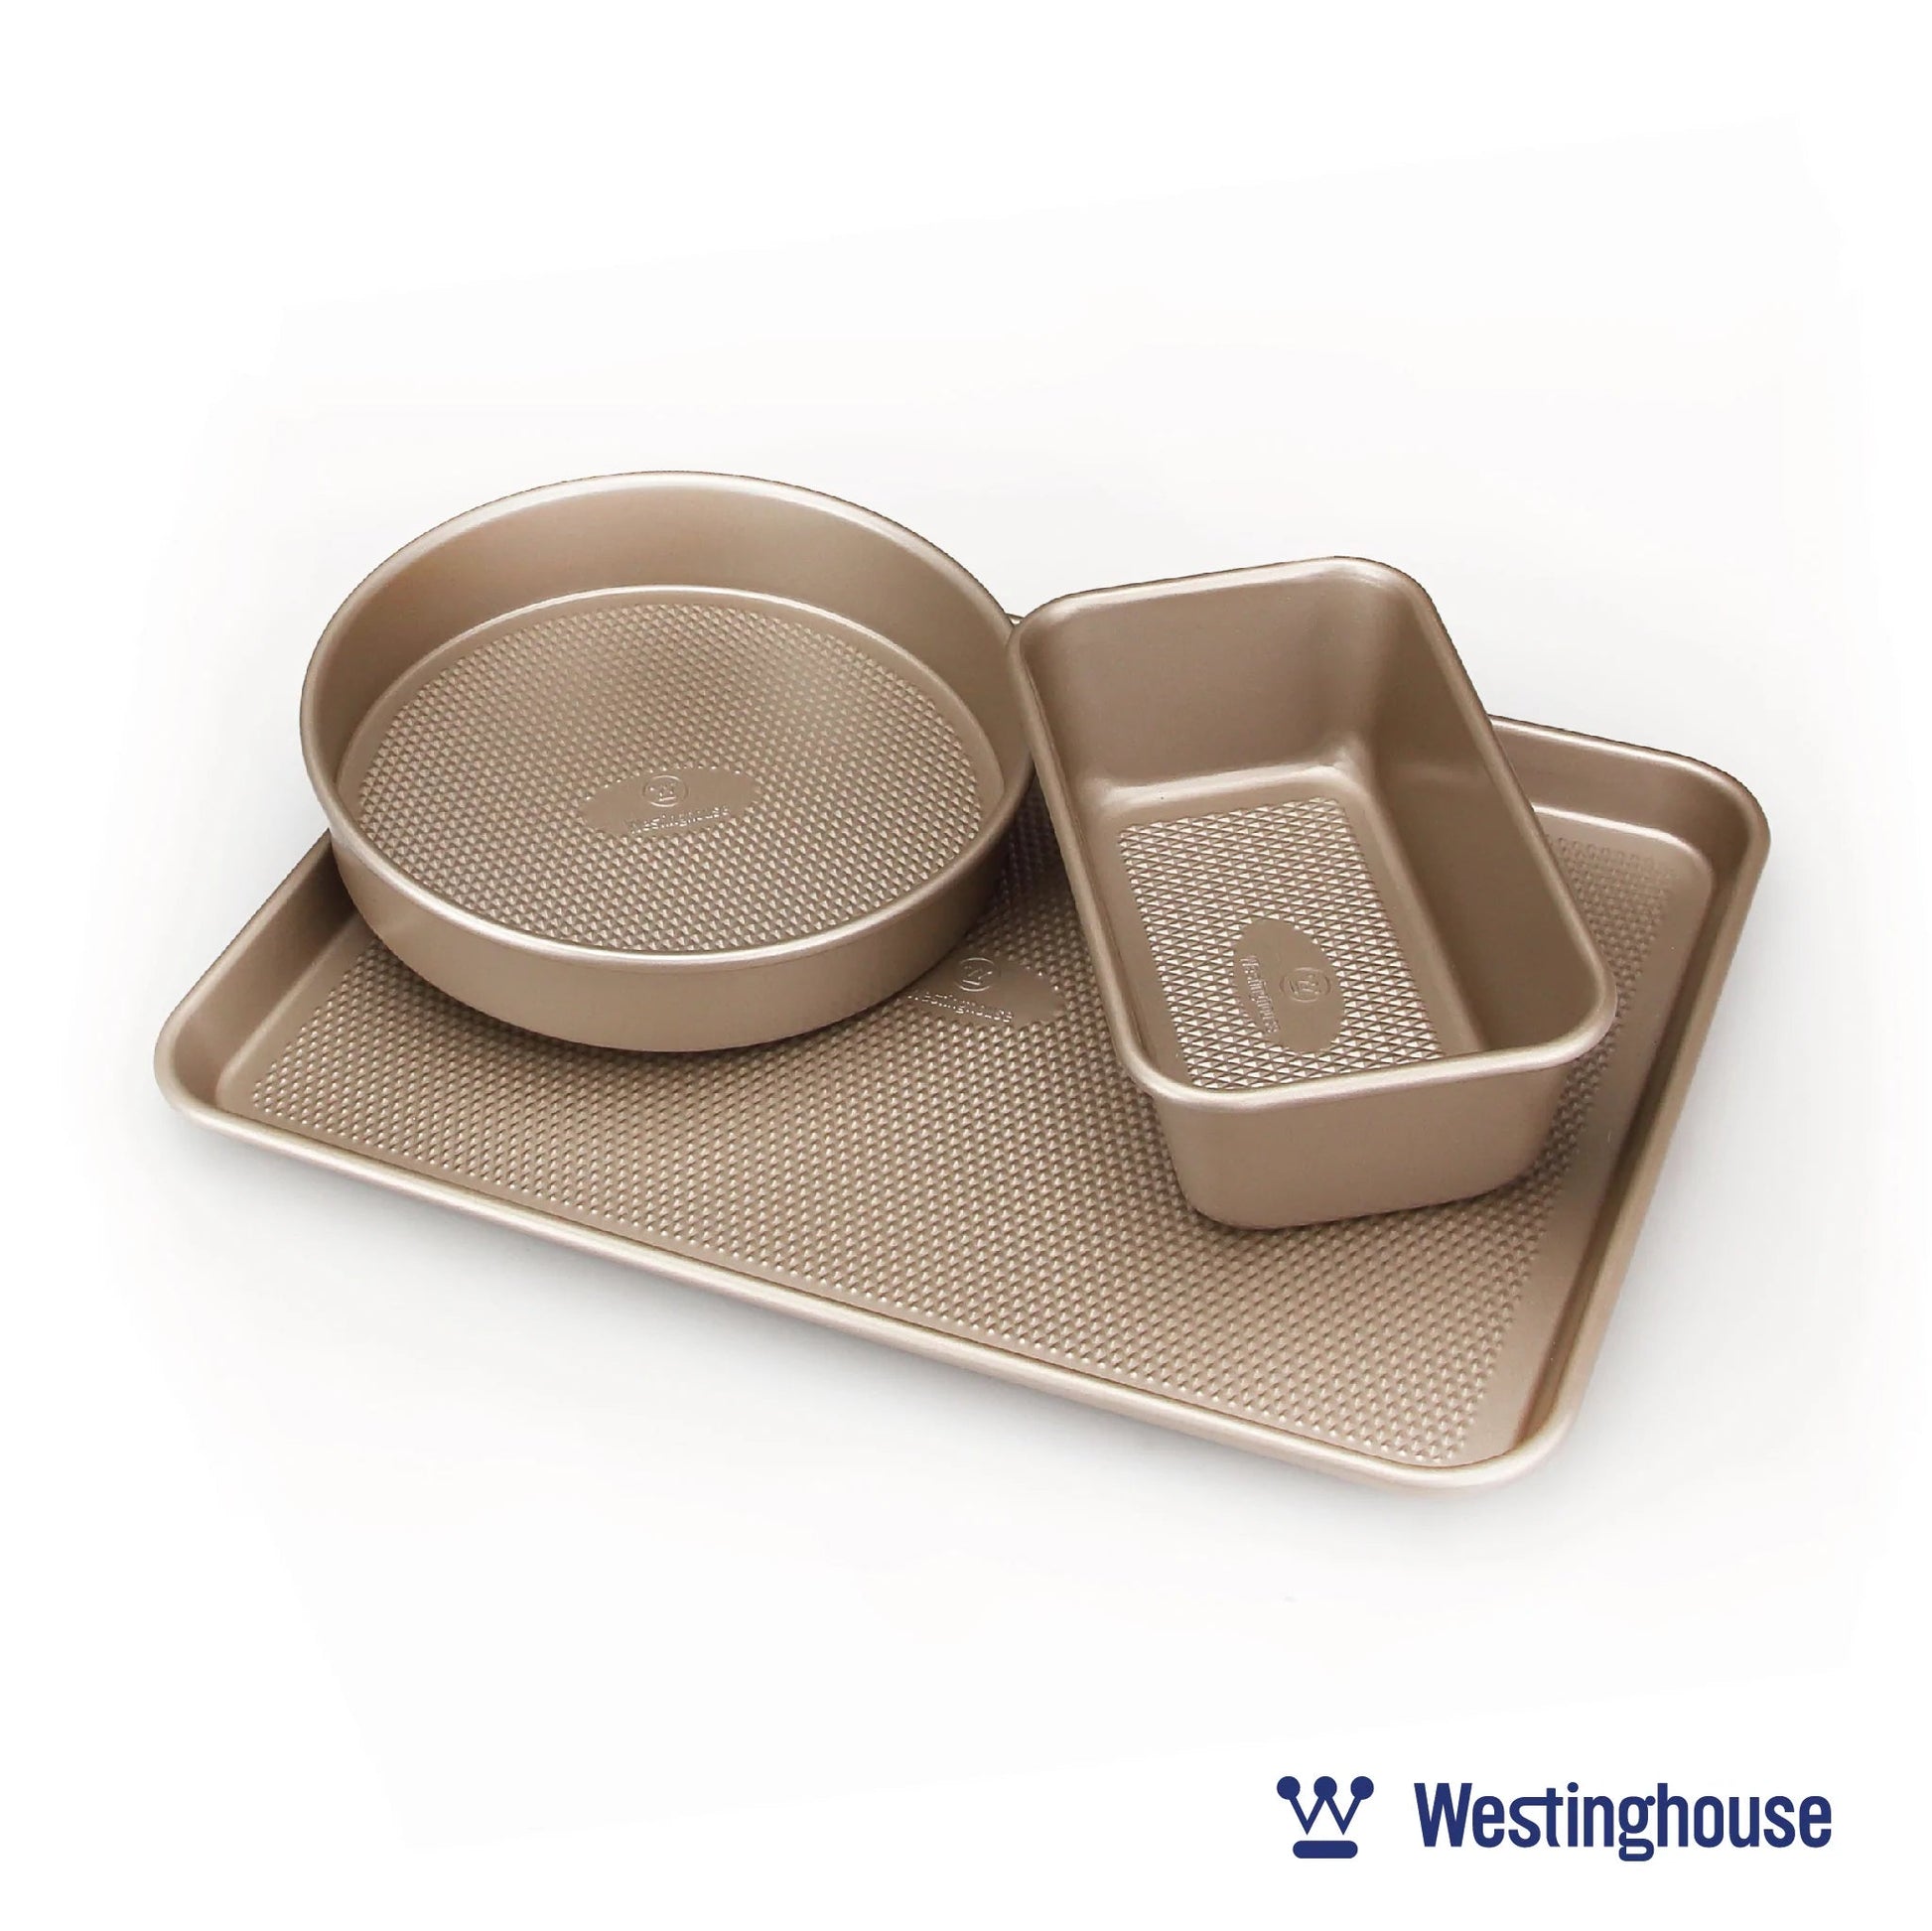 Westinghouse WH-2 Carbon Steel Baking Pan Set with 1 Loaf Pan 1 Round Pan & 1 Cookie Tray Premium Non-Stick Coating - 3 Piece